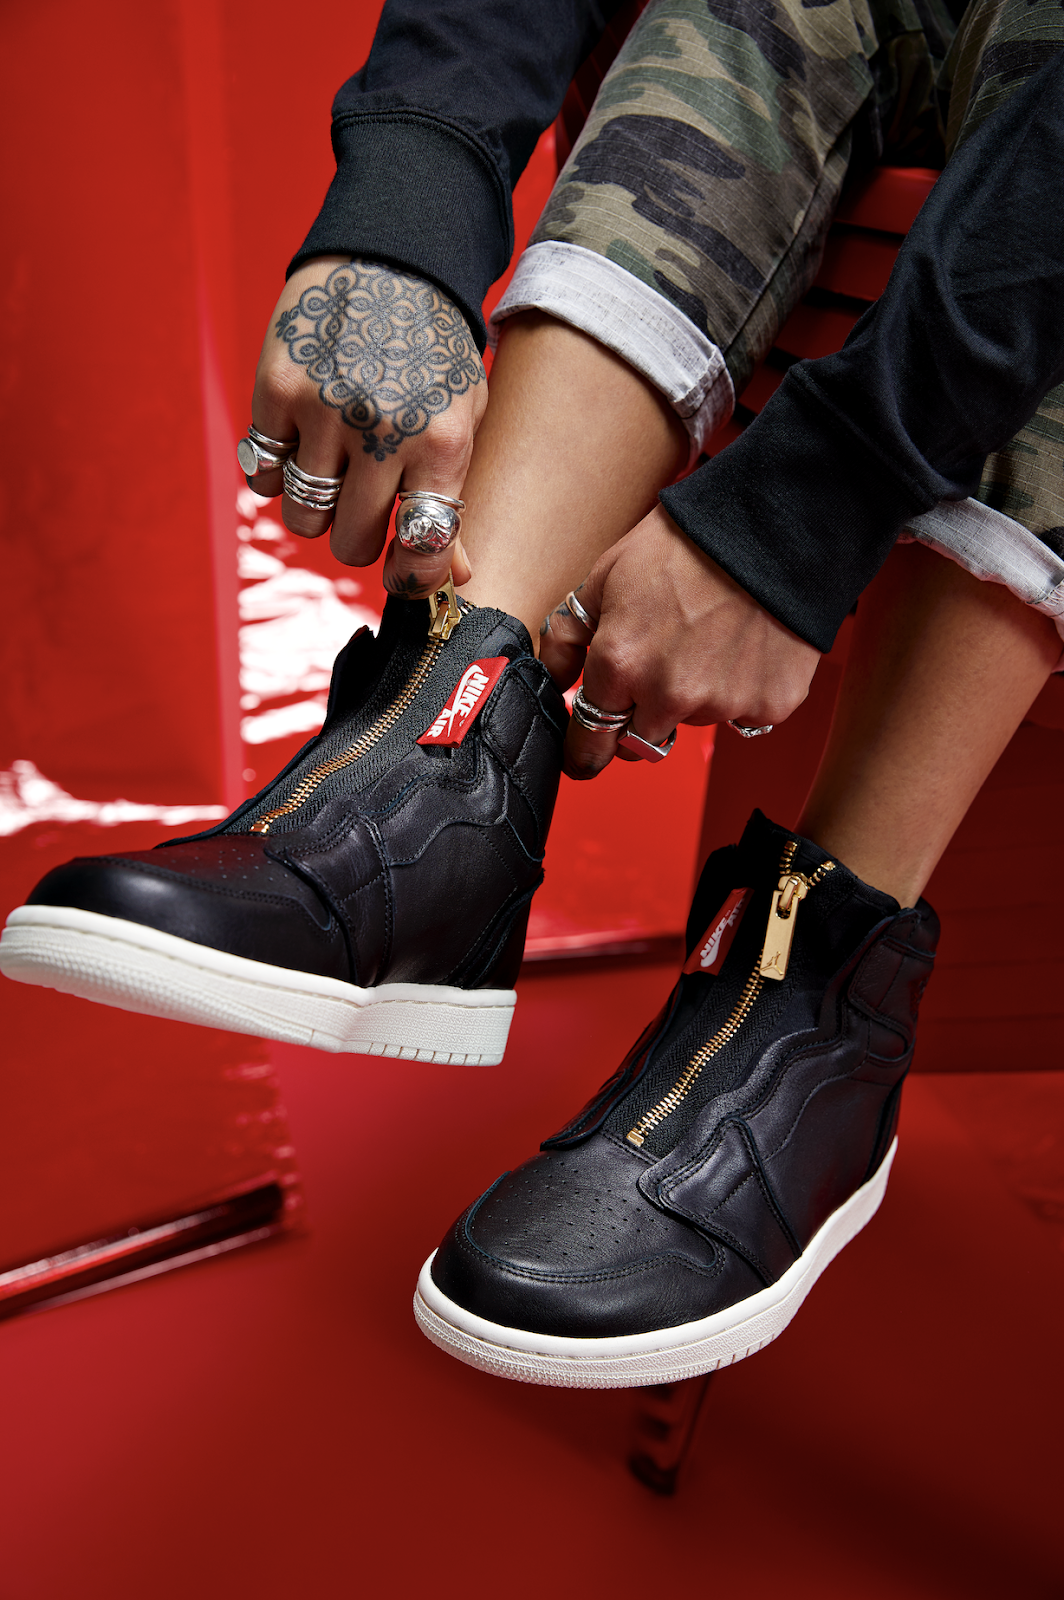 WORK: AIR JORDAN 1 BRAND CAMPAIGN | UK WOMEN'S FASHION, FITNESS AND